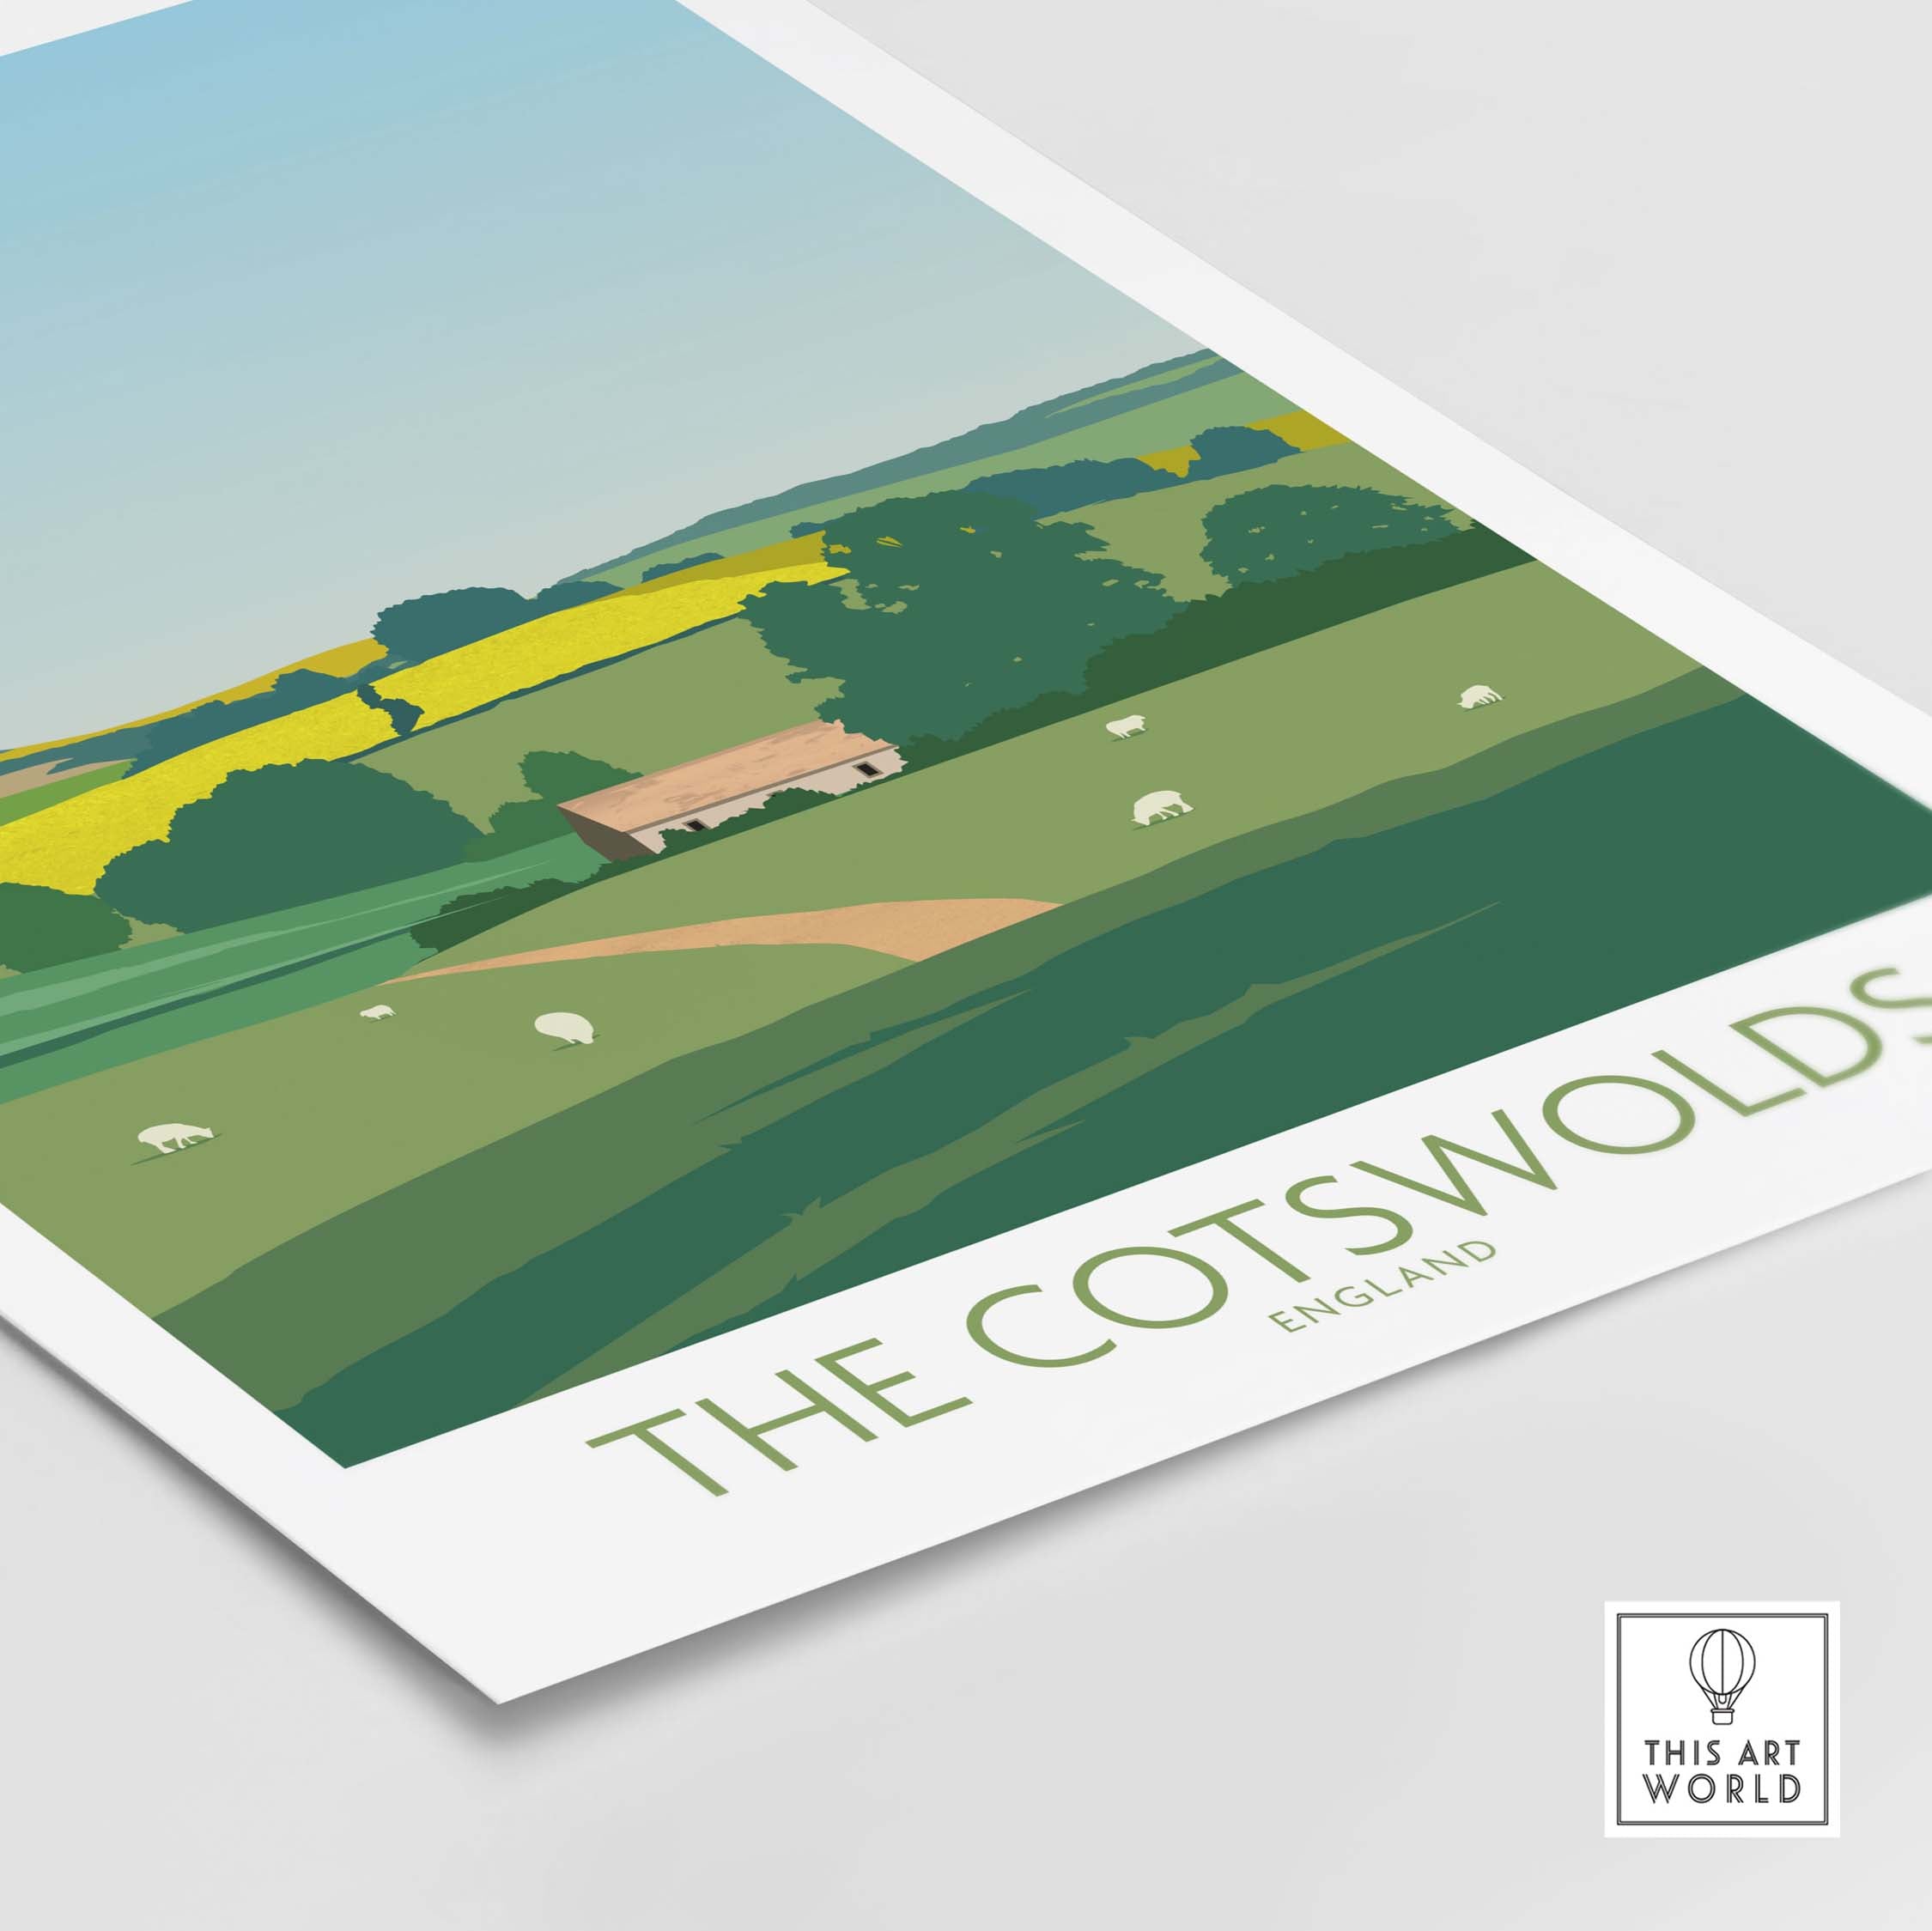 the cotswolds print england travel poster